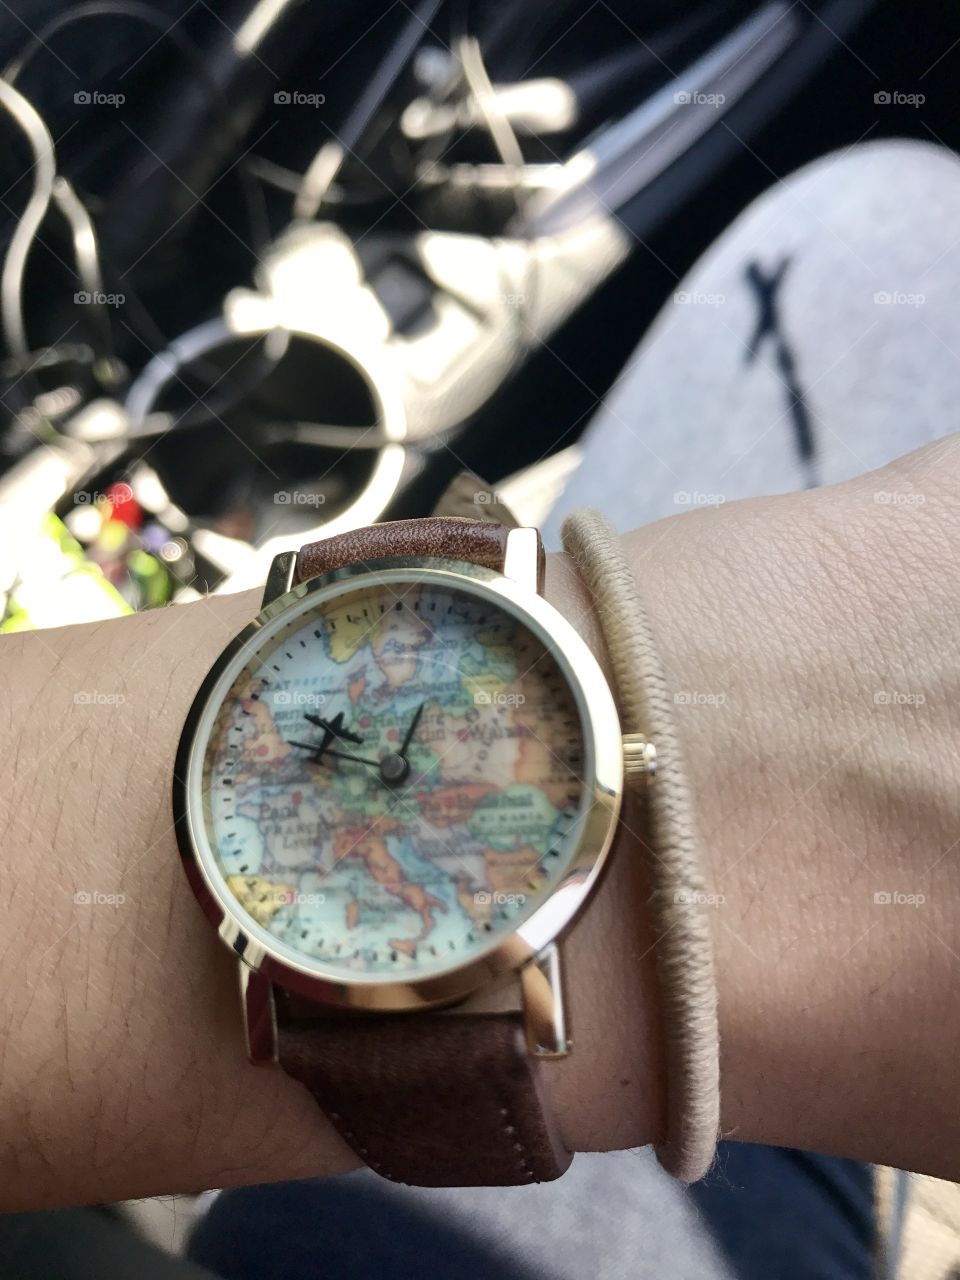 Favorite worldly watch I bought